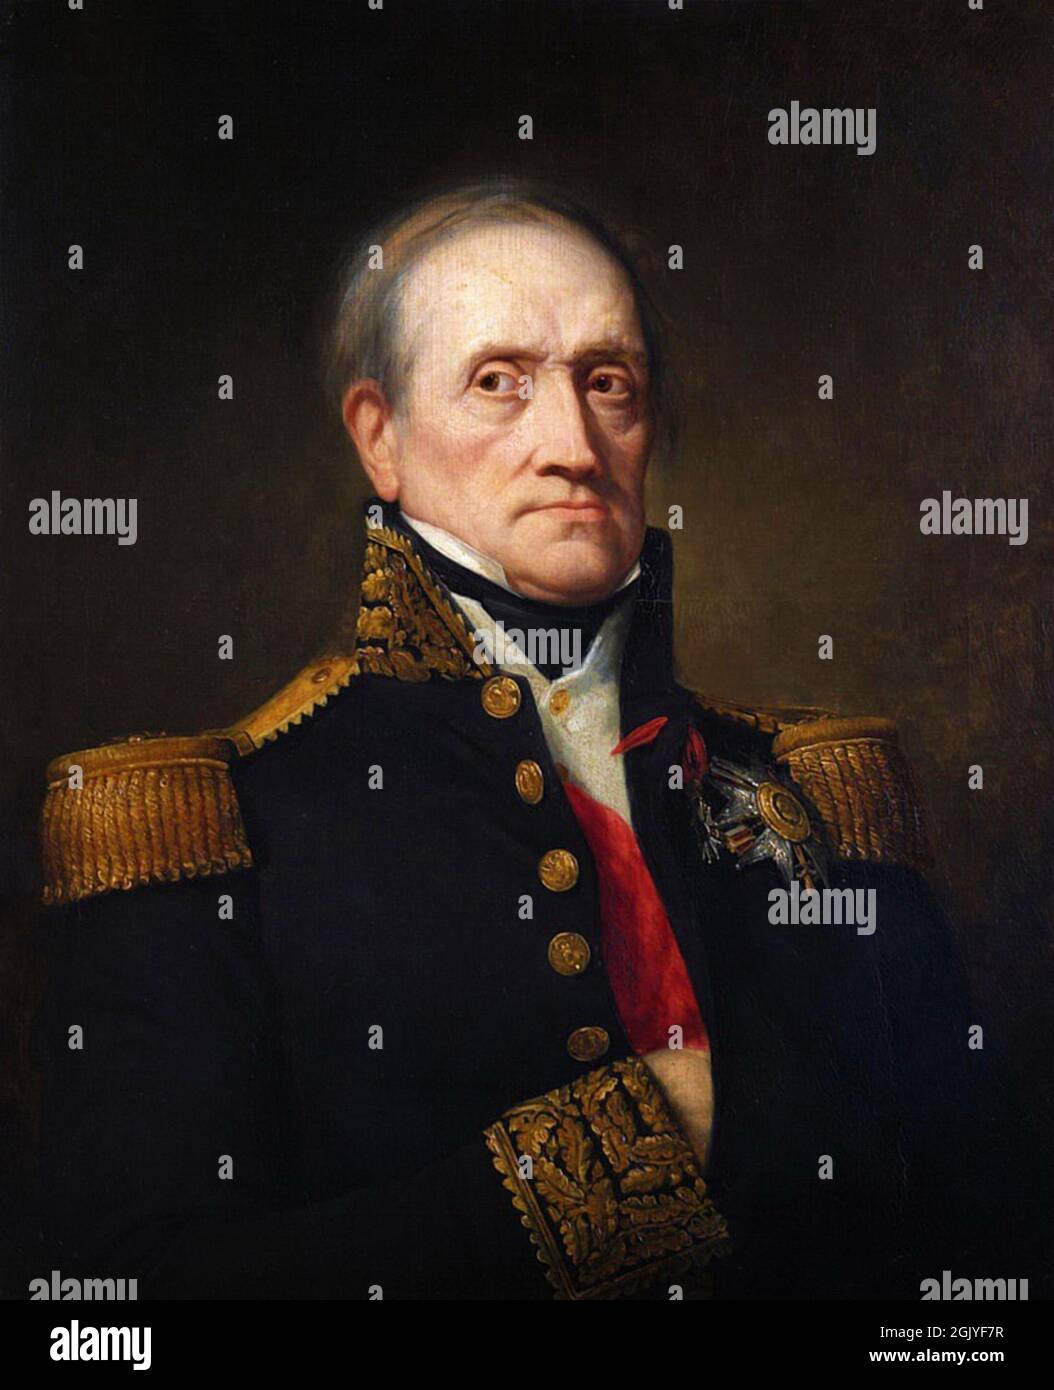 Marshal Jean-de-dieu Soult. Napoleon only promoted his men by merit, not by their title, which gave him a formidable army during the Napoleonic Wars. Painting by George Peter Healey. Soult was the son of a contry notary. Stock Photo